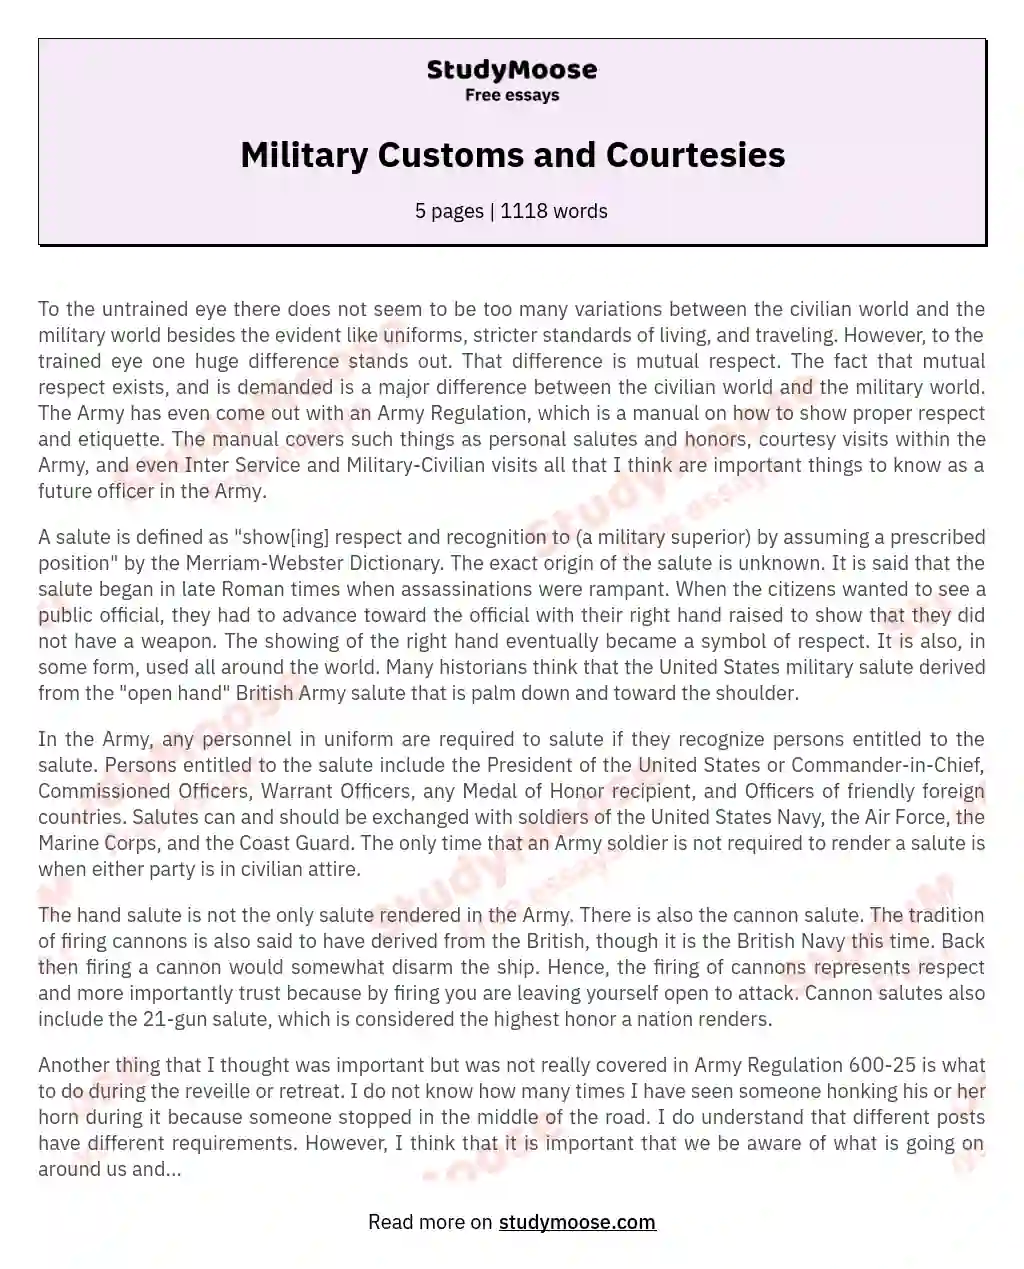 Military Customs and Courtesies essay